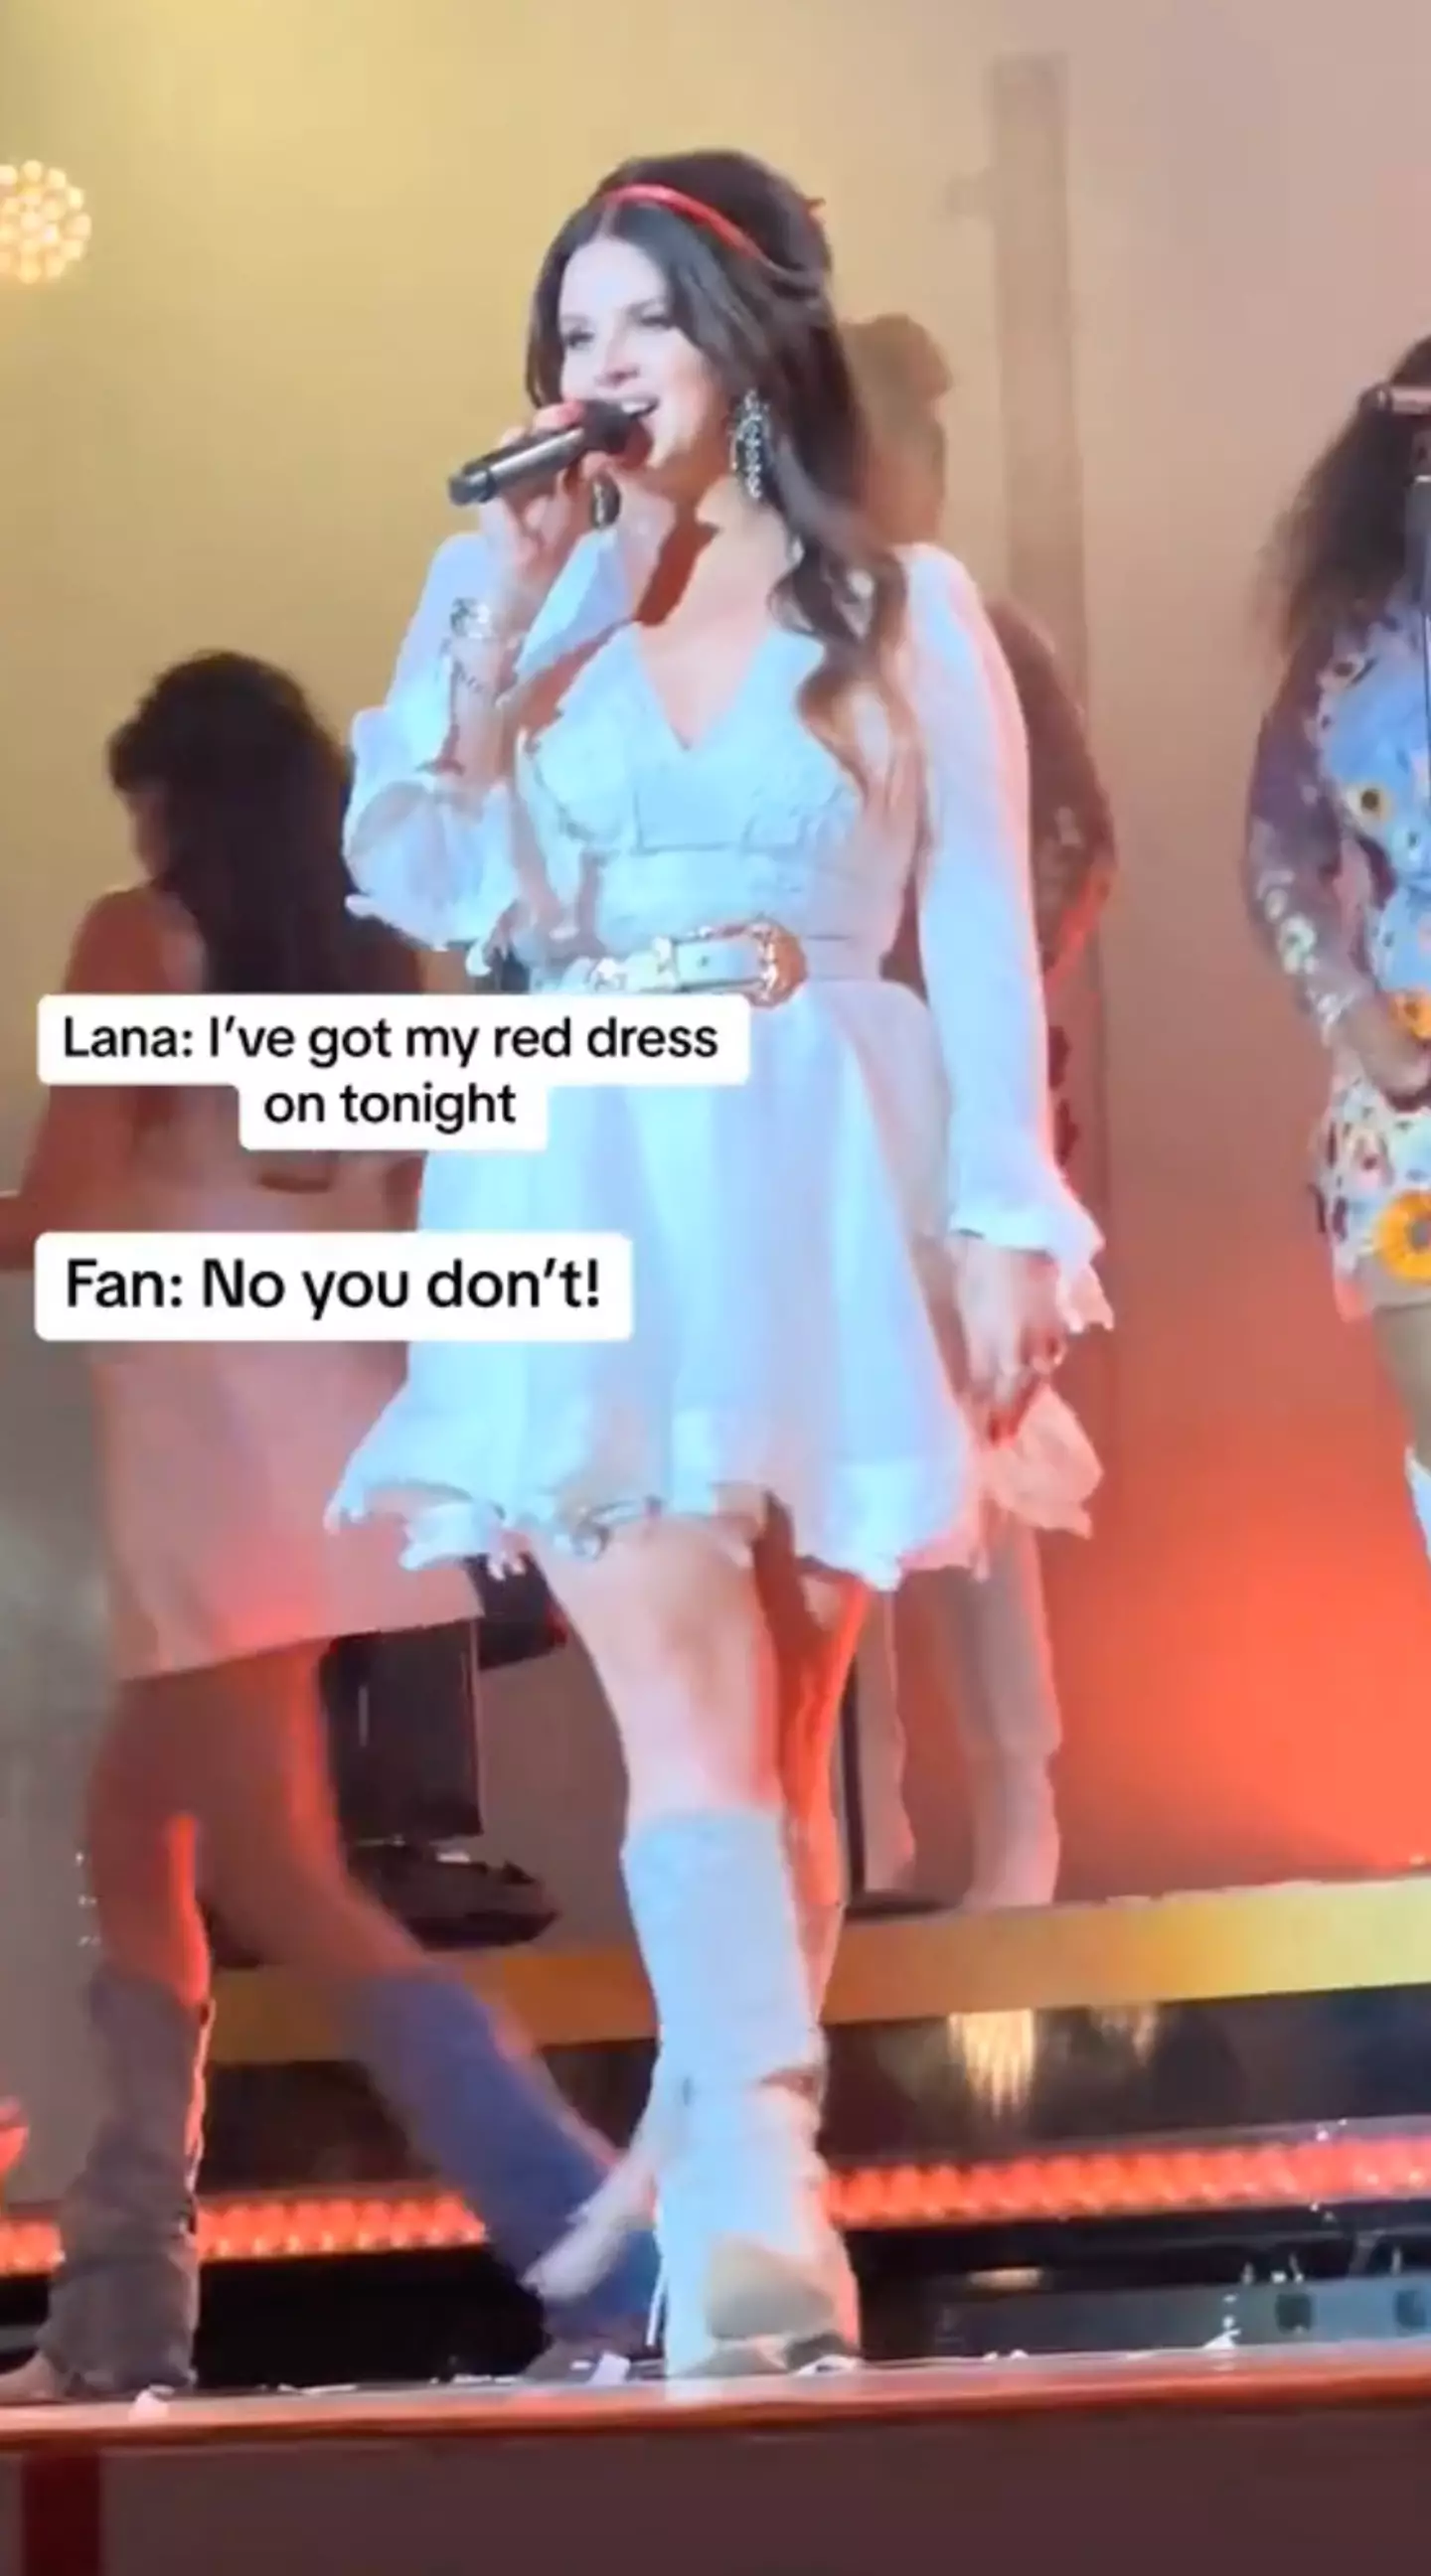 Some fans were totally shocked by Lana Del Rey's voice.